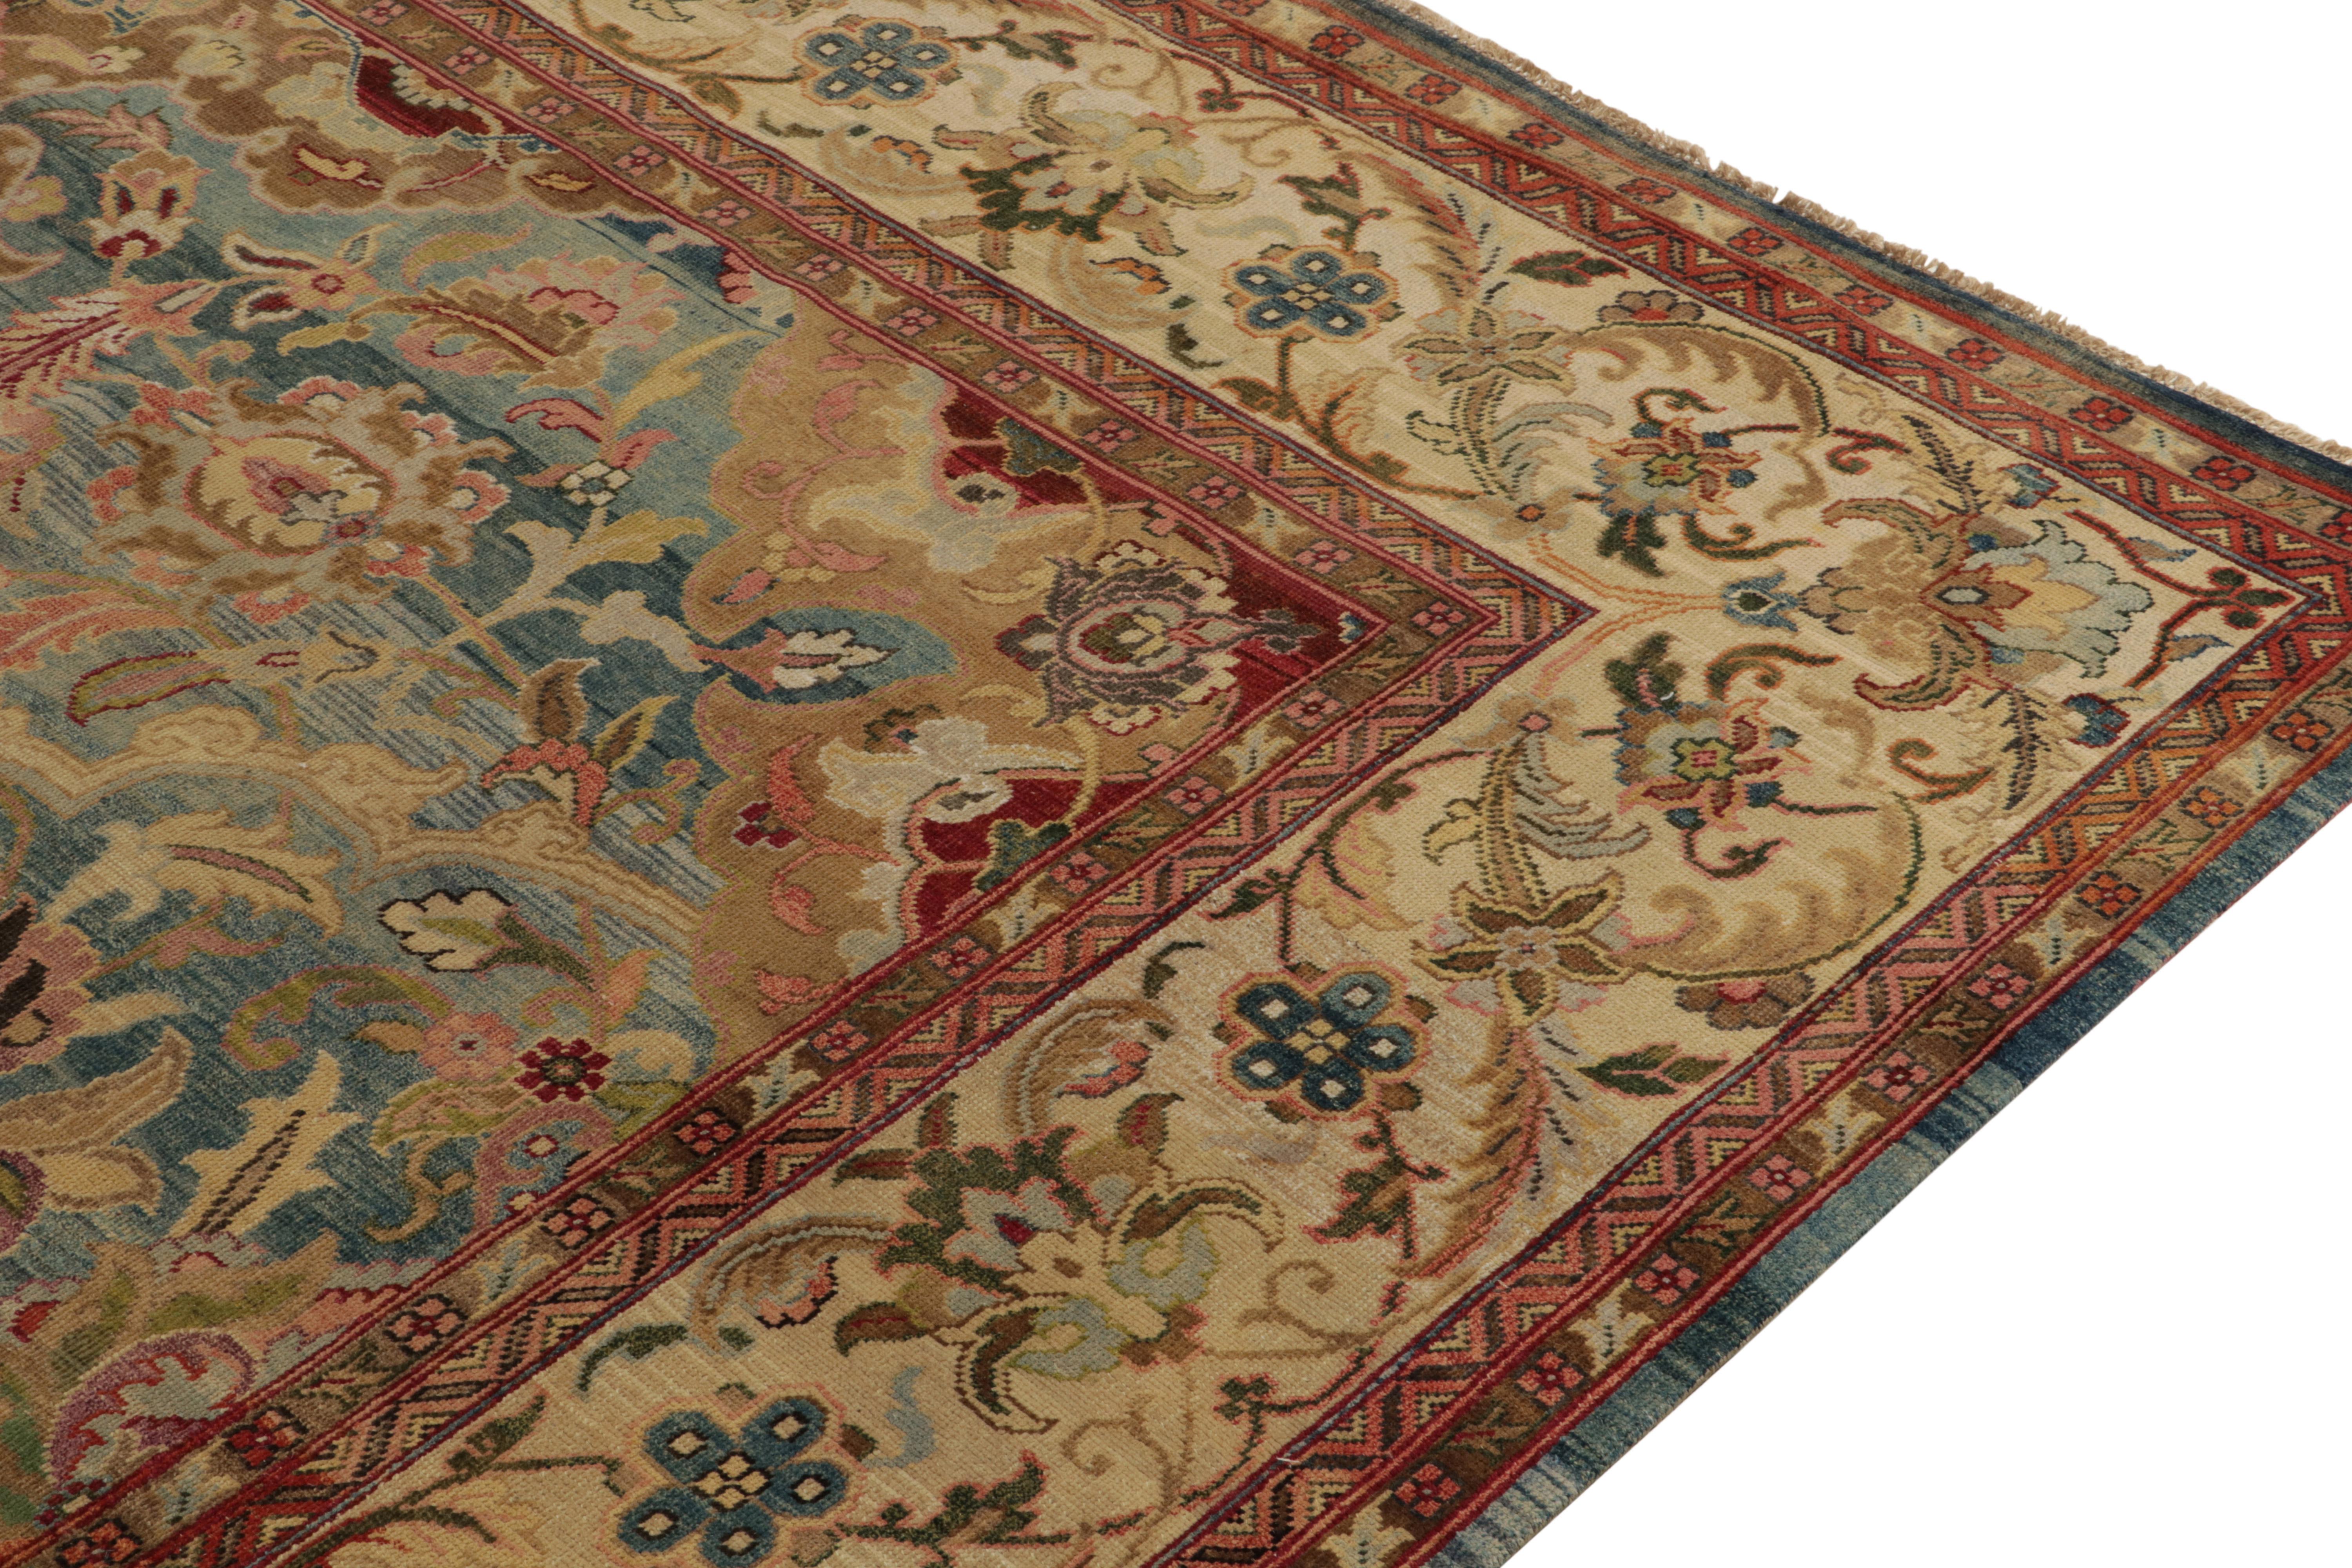 Hand-Knotted Rug & Kilim’s Classic Persian style rug in Blue and Beige-Brown Floral Patterns For Sale